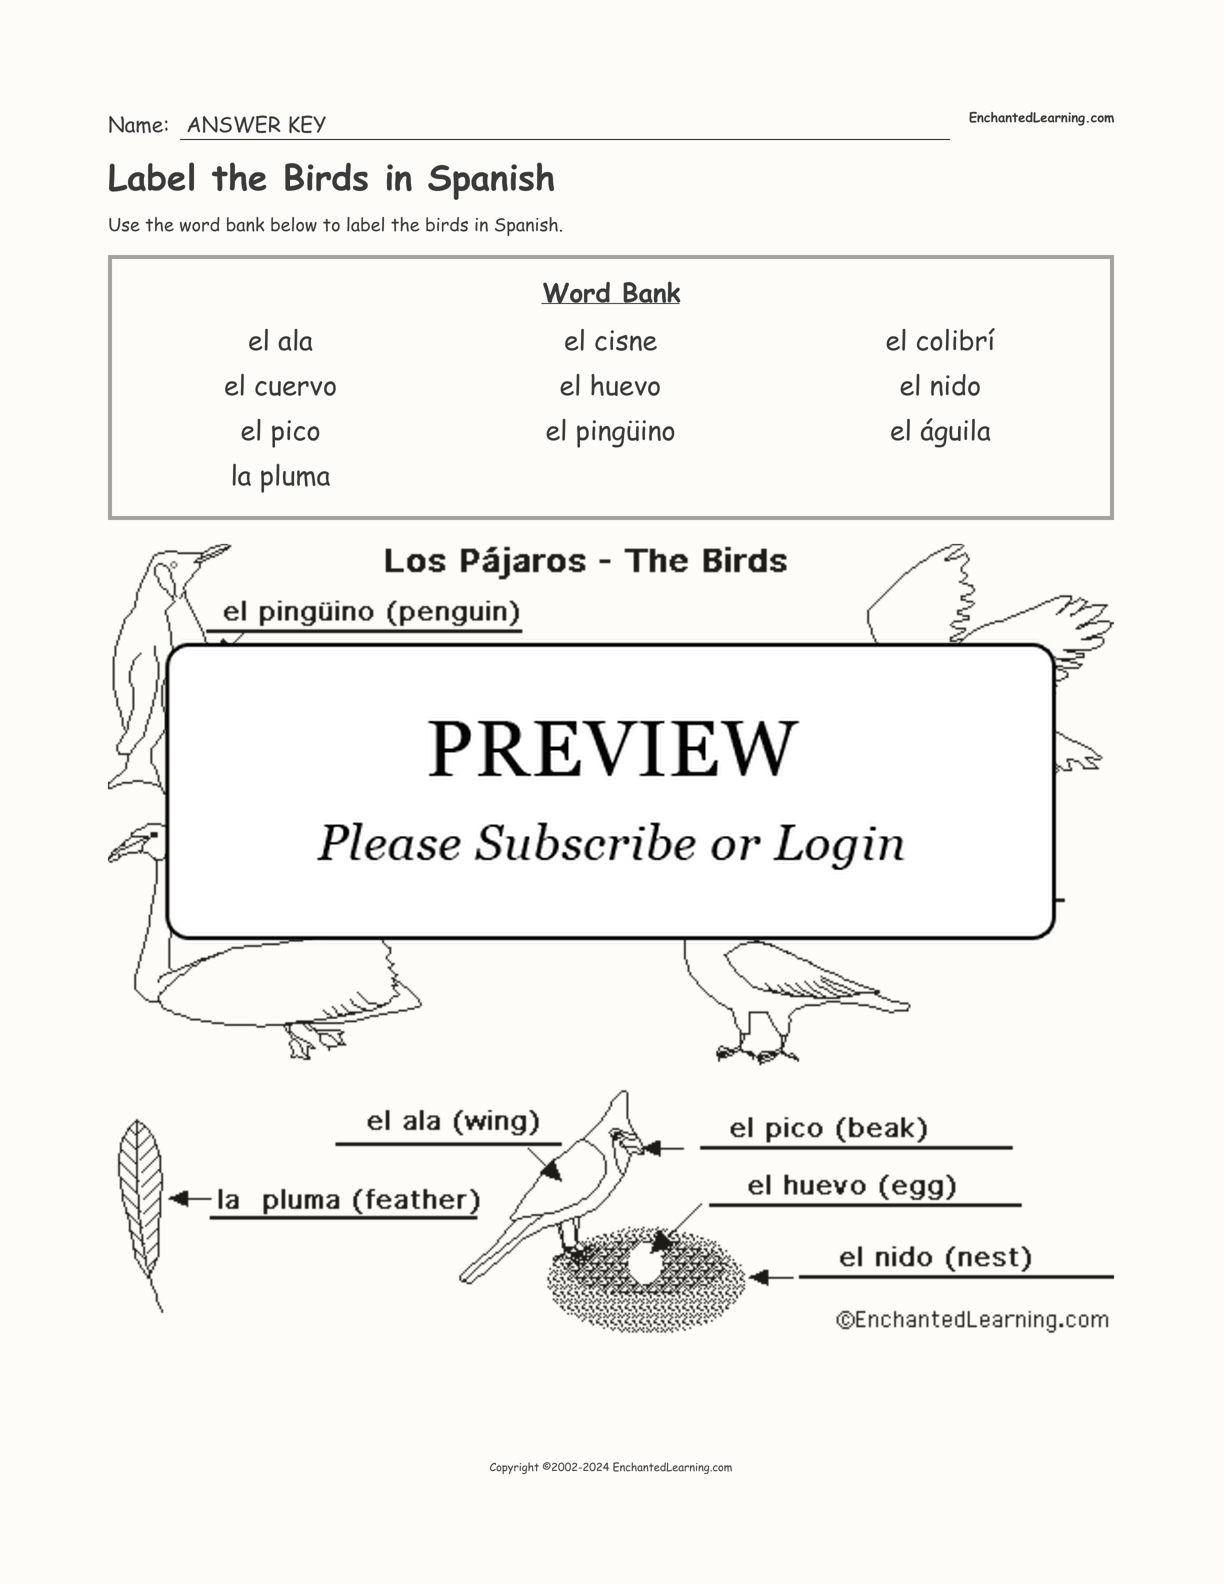 Label the Birds in Spanish interactive worksheet page 2